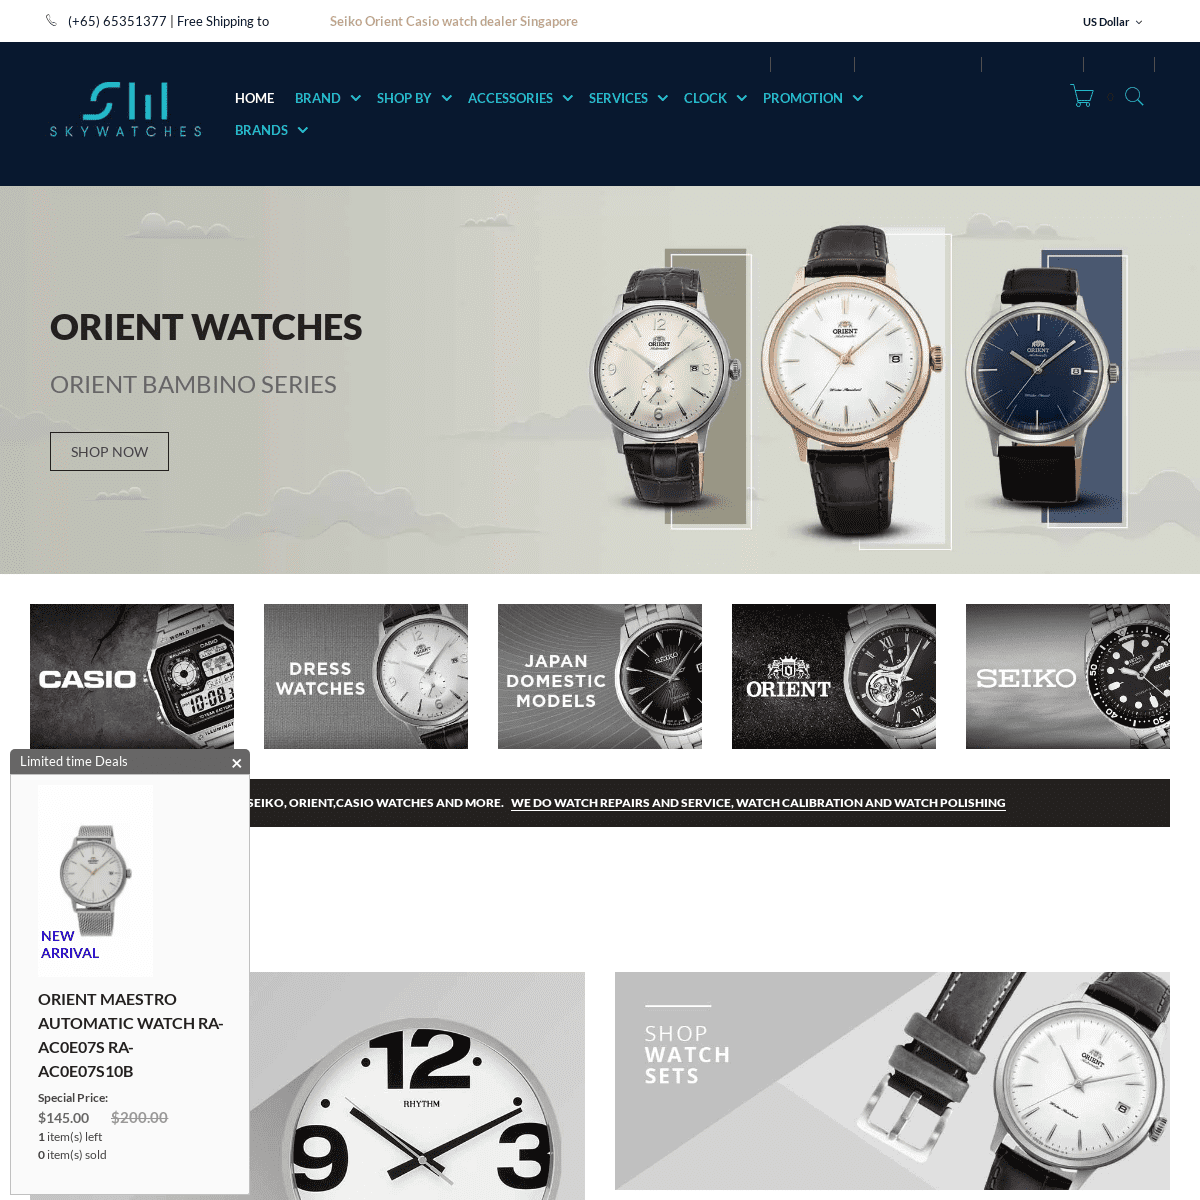 A complete backup of skywatches.com.sg